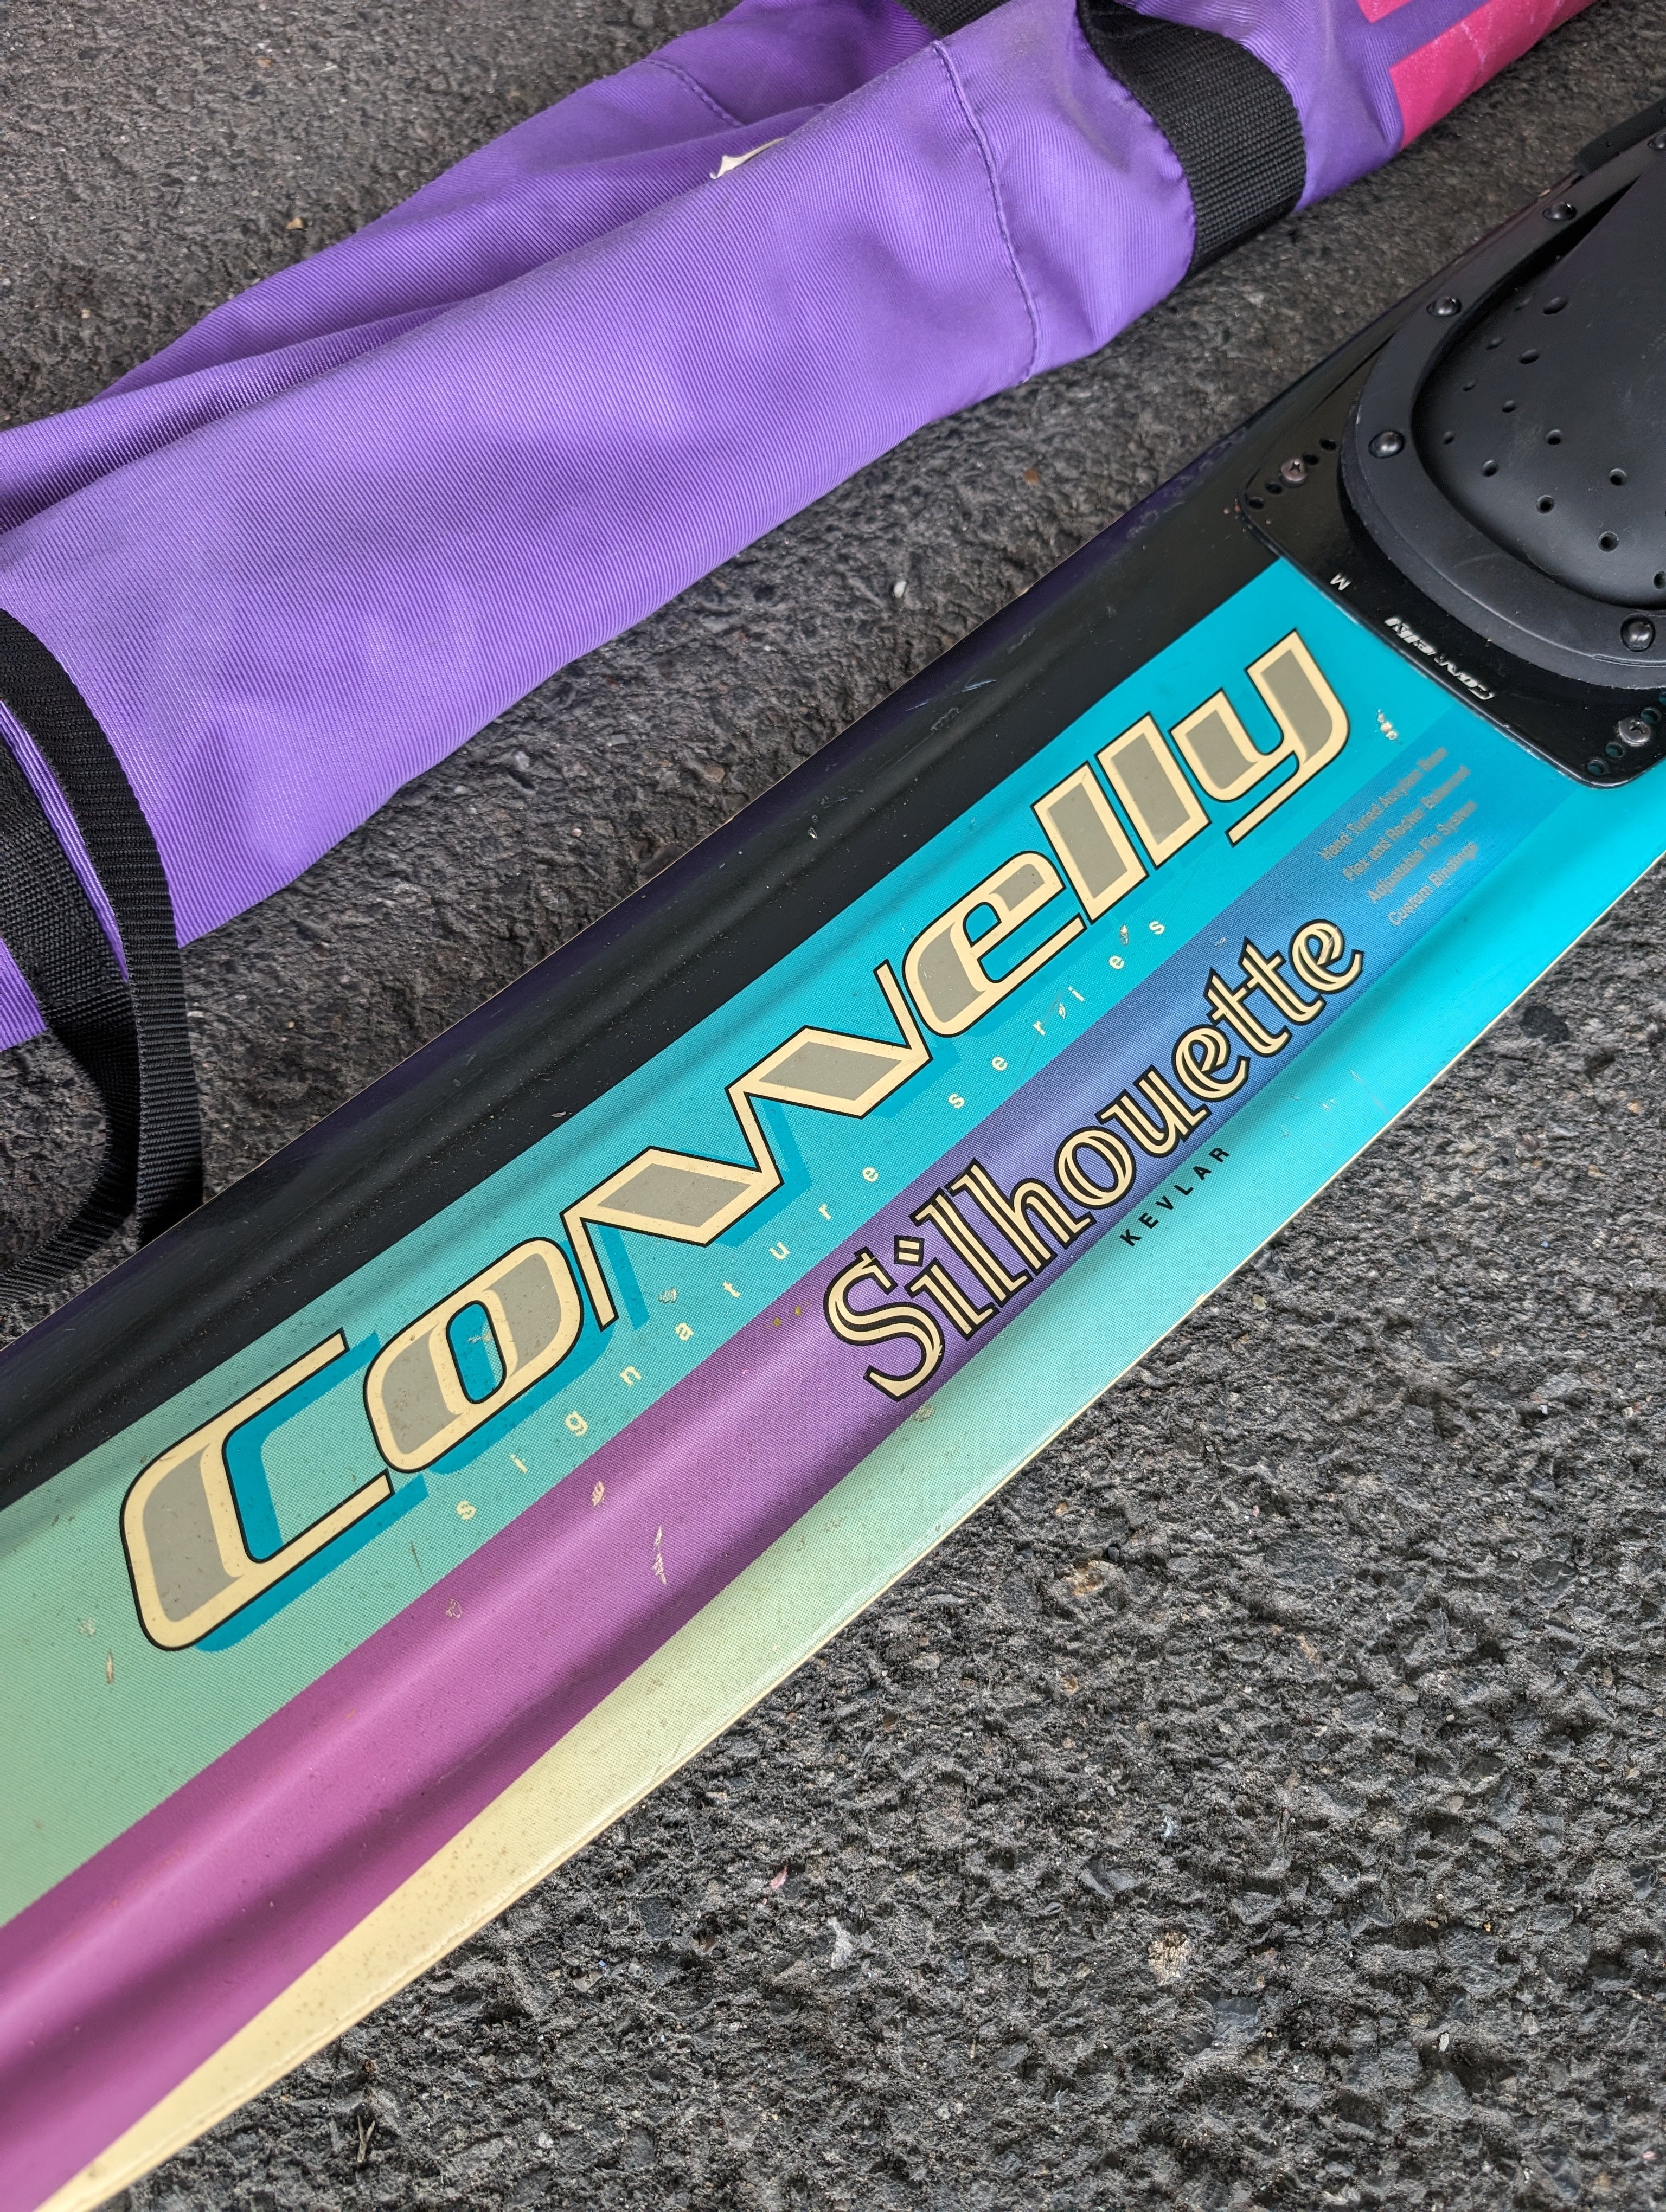 WATER SKI CONNELLY SILHOUETTE F653 [Towing stuff price is Landed CEBU] X2312-98